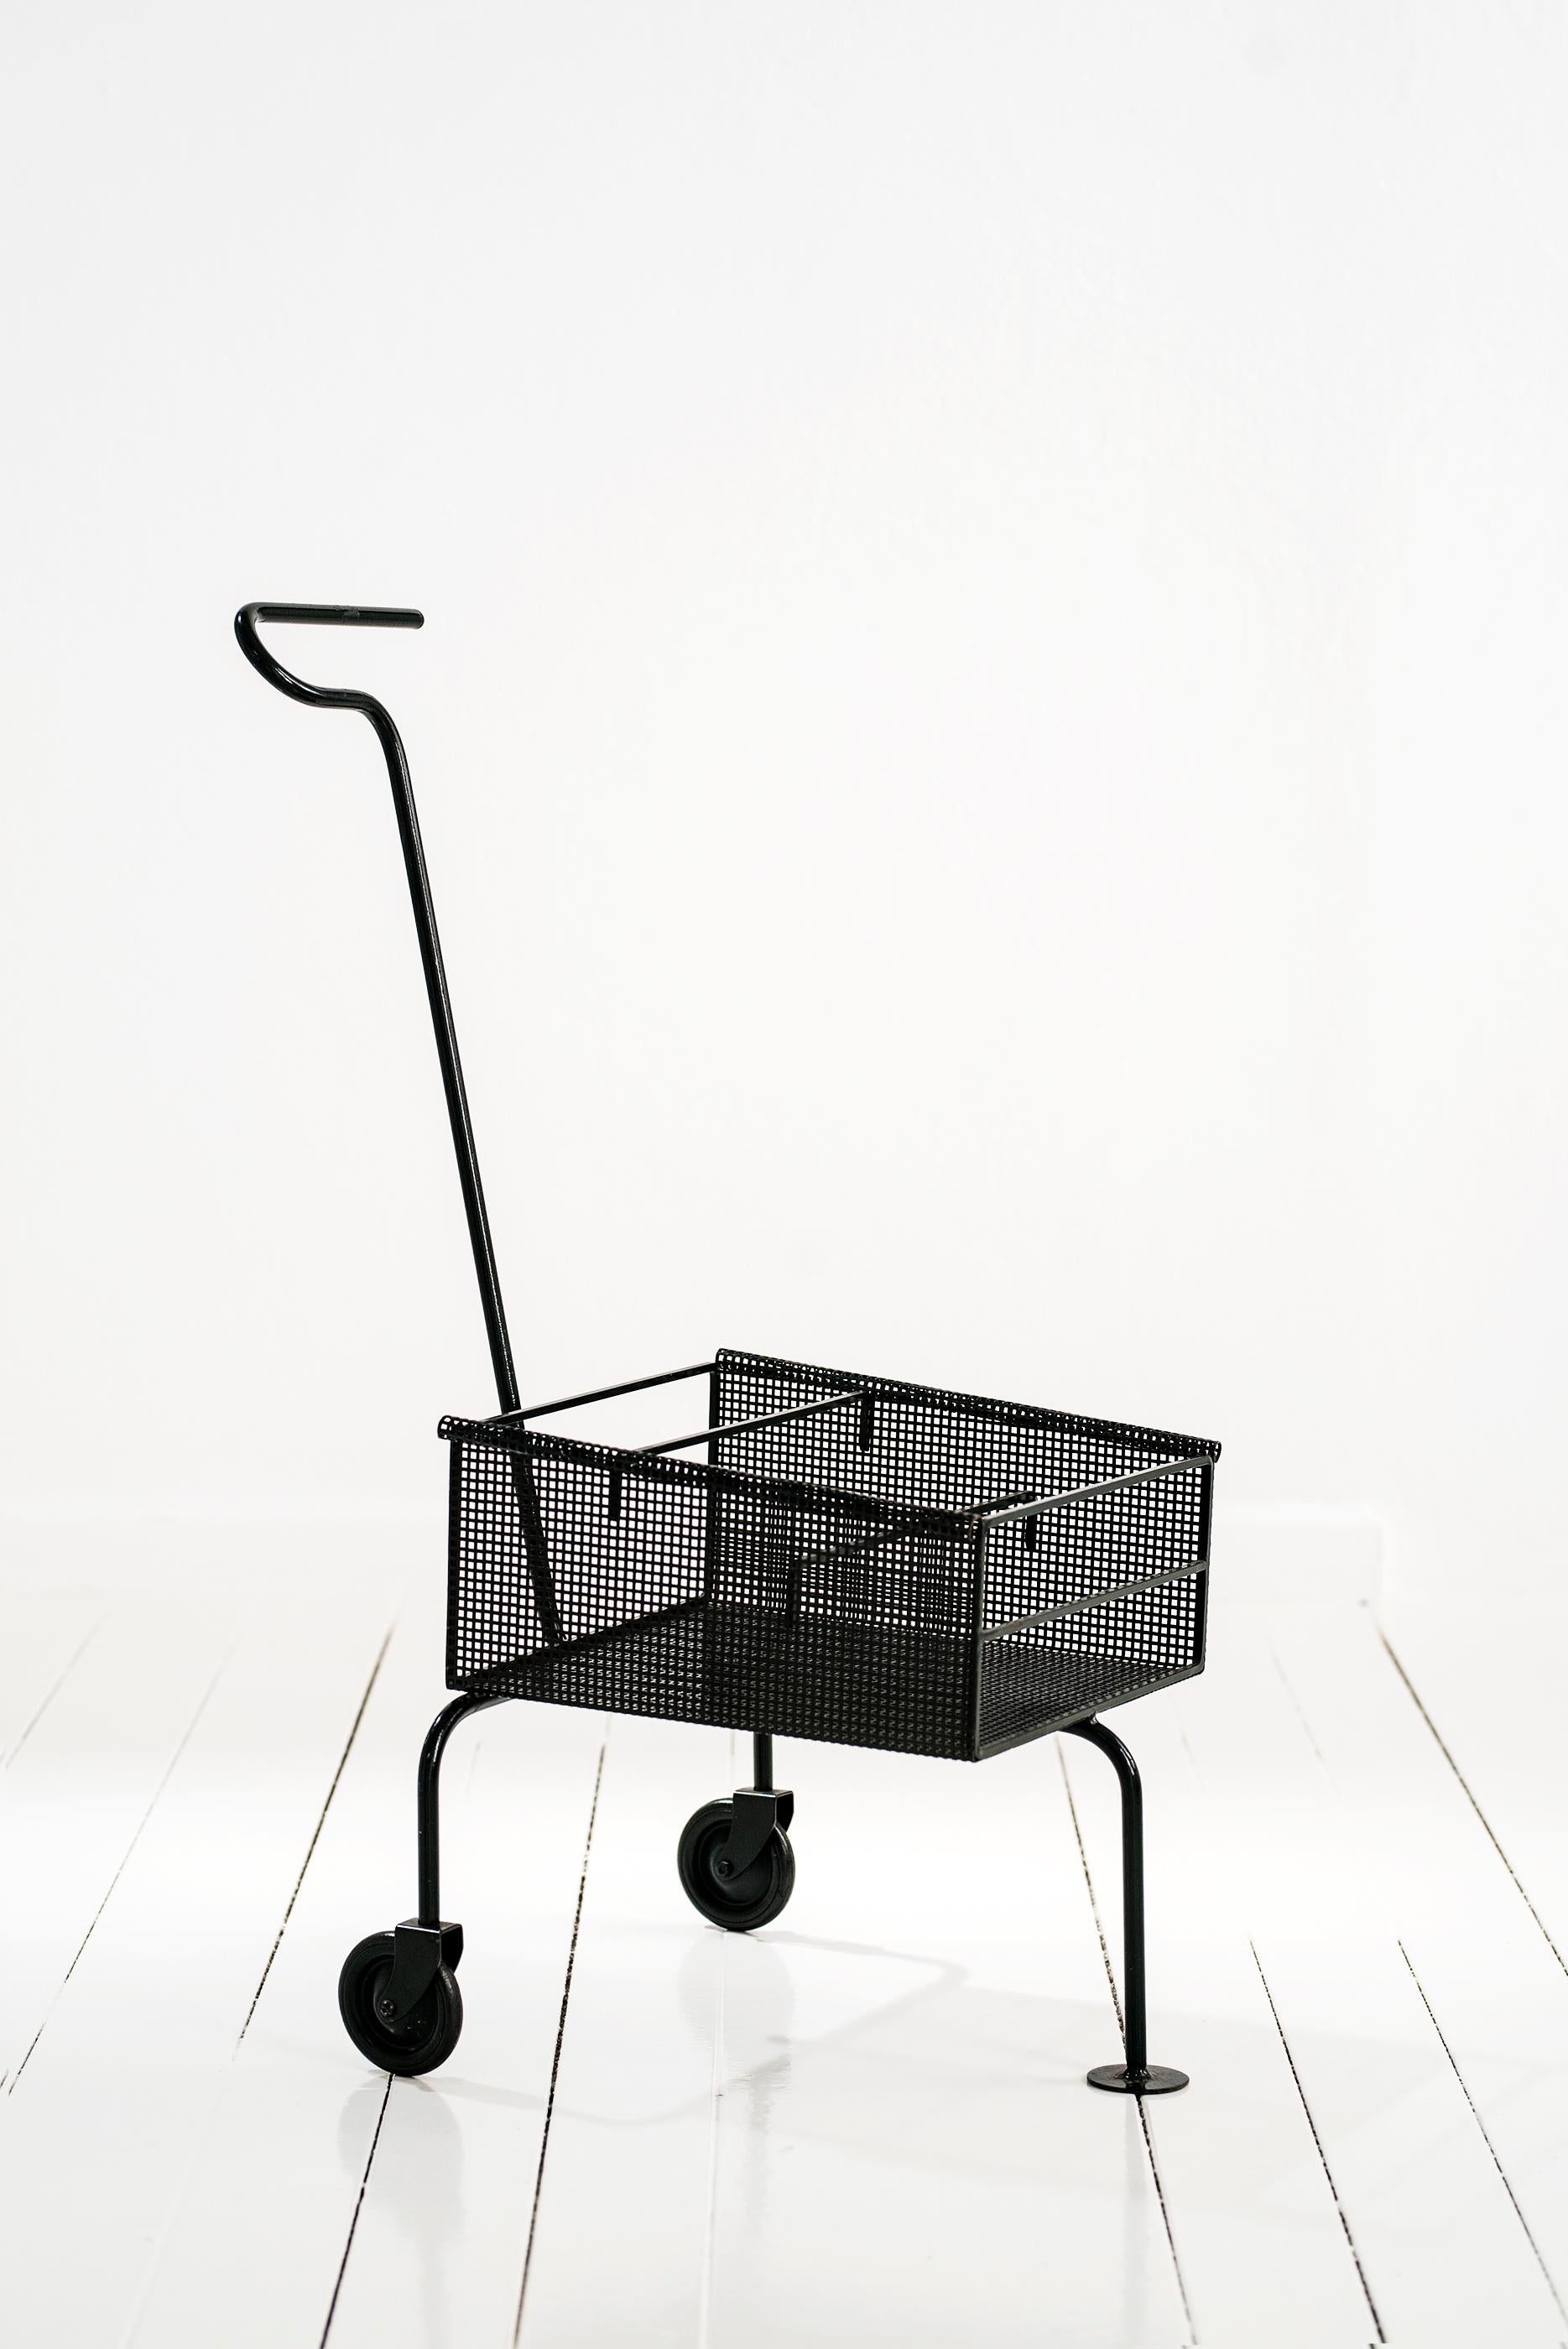 Car by Mathieu Mategot, model Trolley Pousse-Pousse
Made of perforated metal
circa 1953, France
Preserving original patina

Measurements: 75 × 41 × 64 cm.